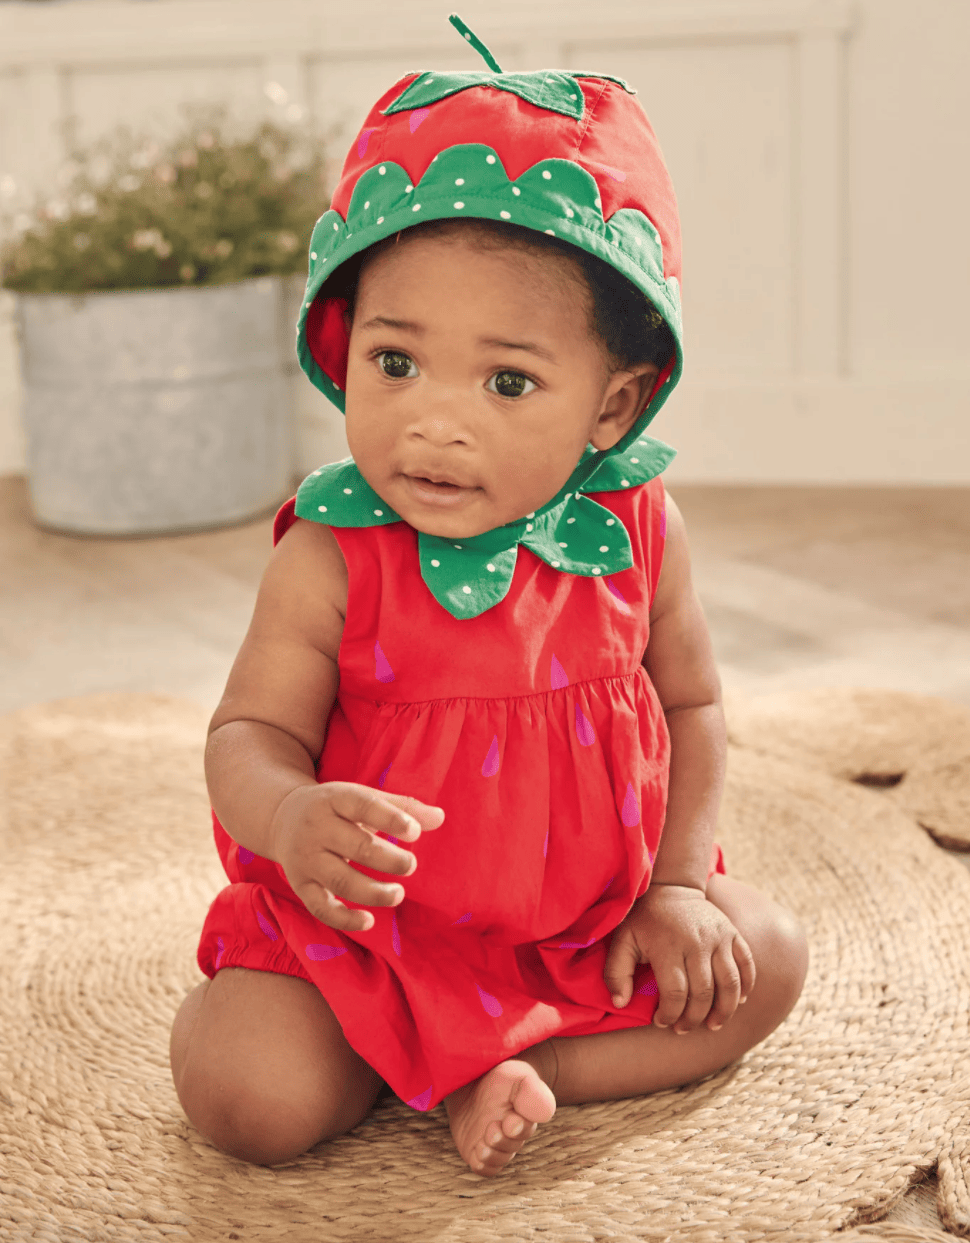 Baby wearing a strawberry bubble romper and a matching hat while sitting on a rug.